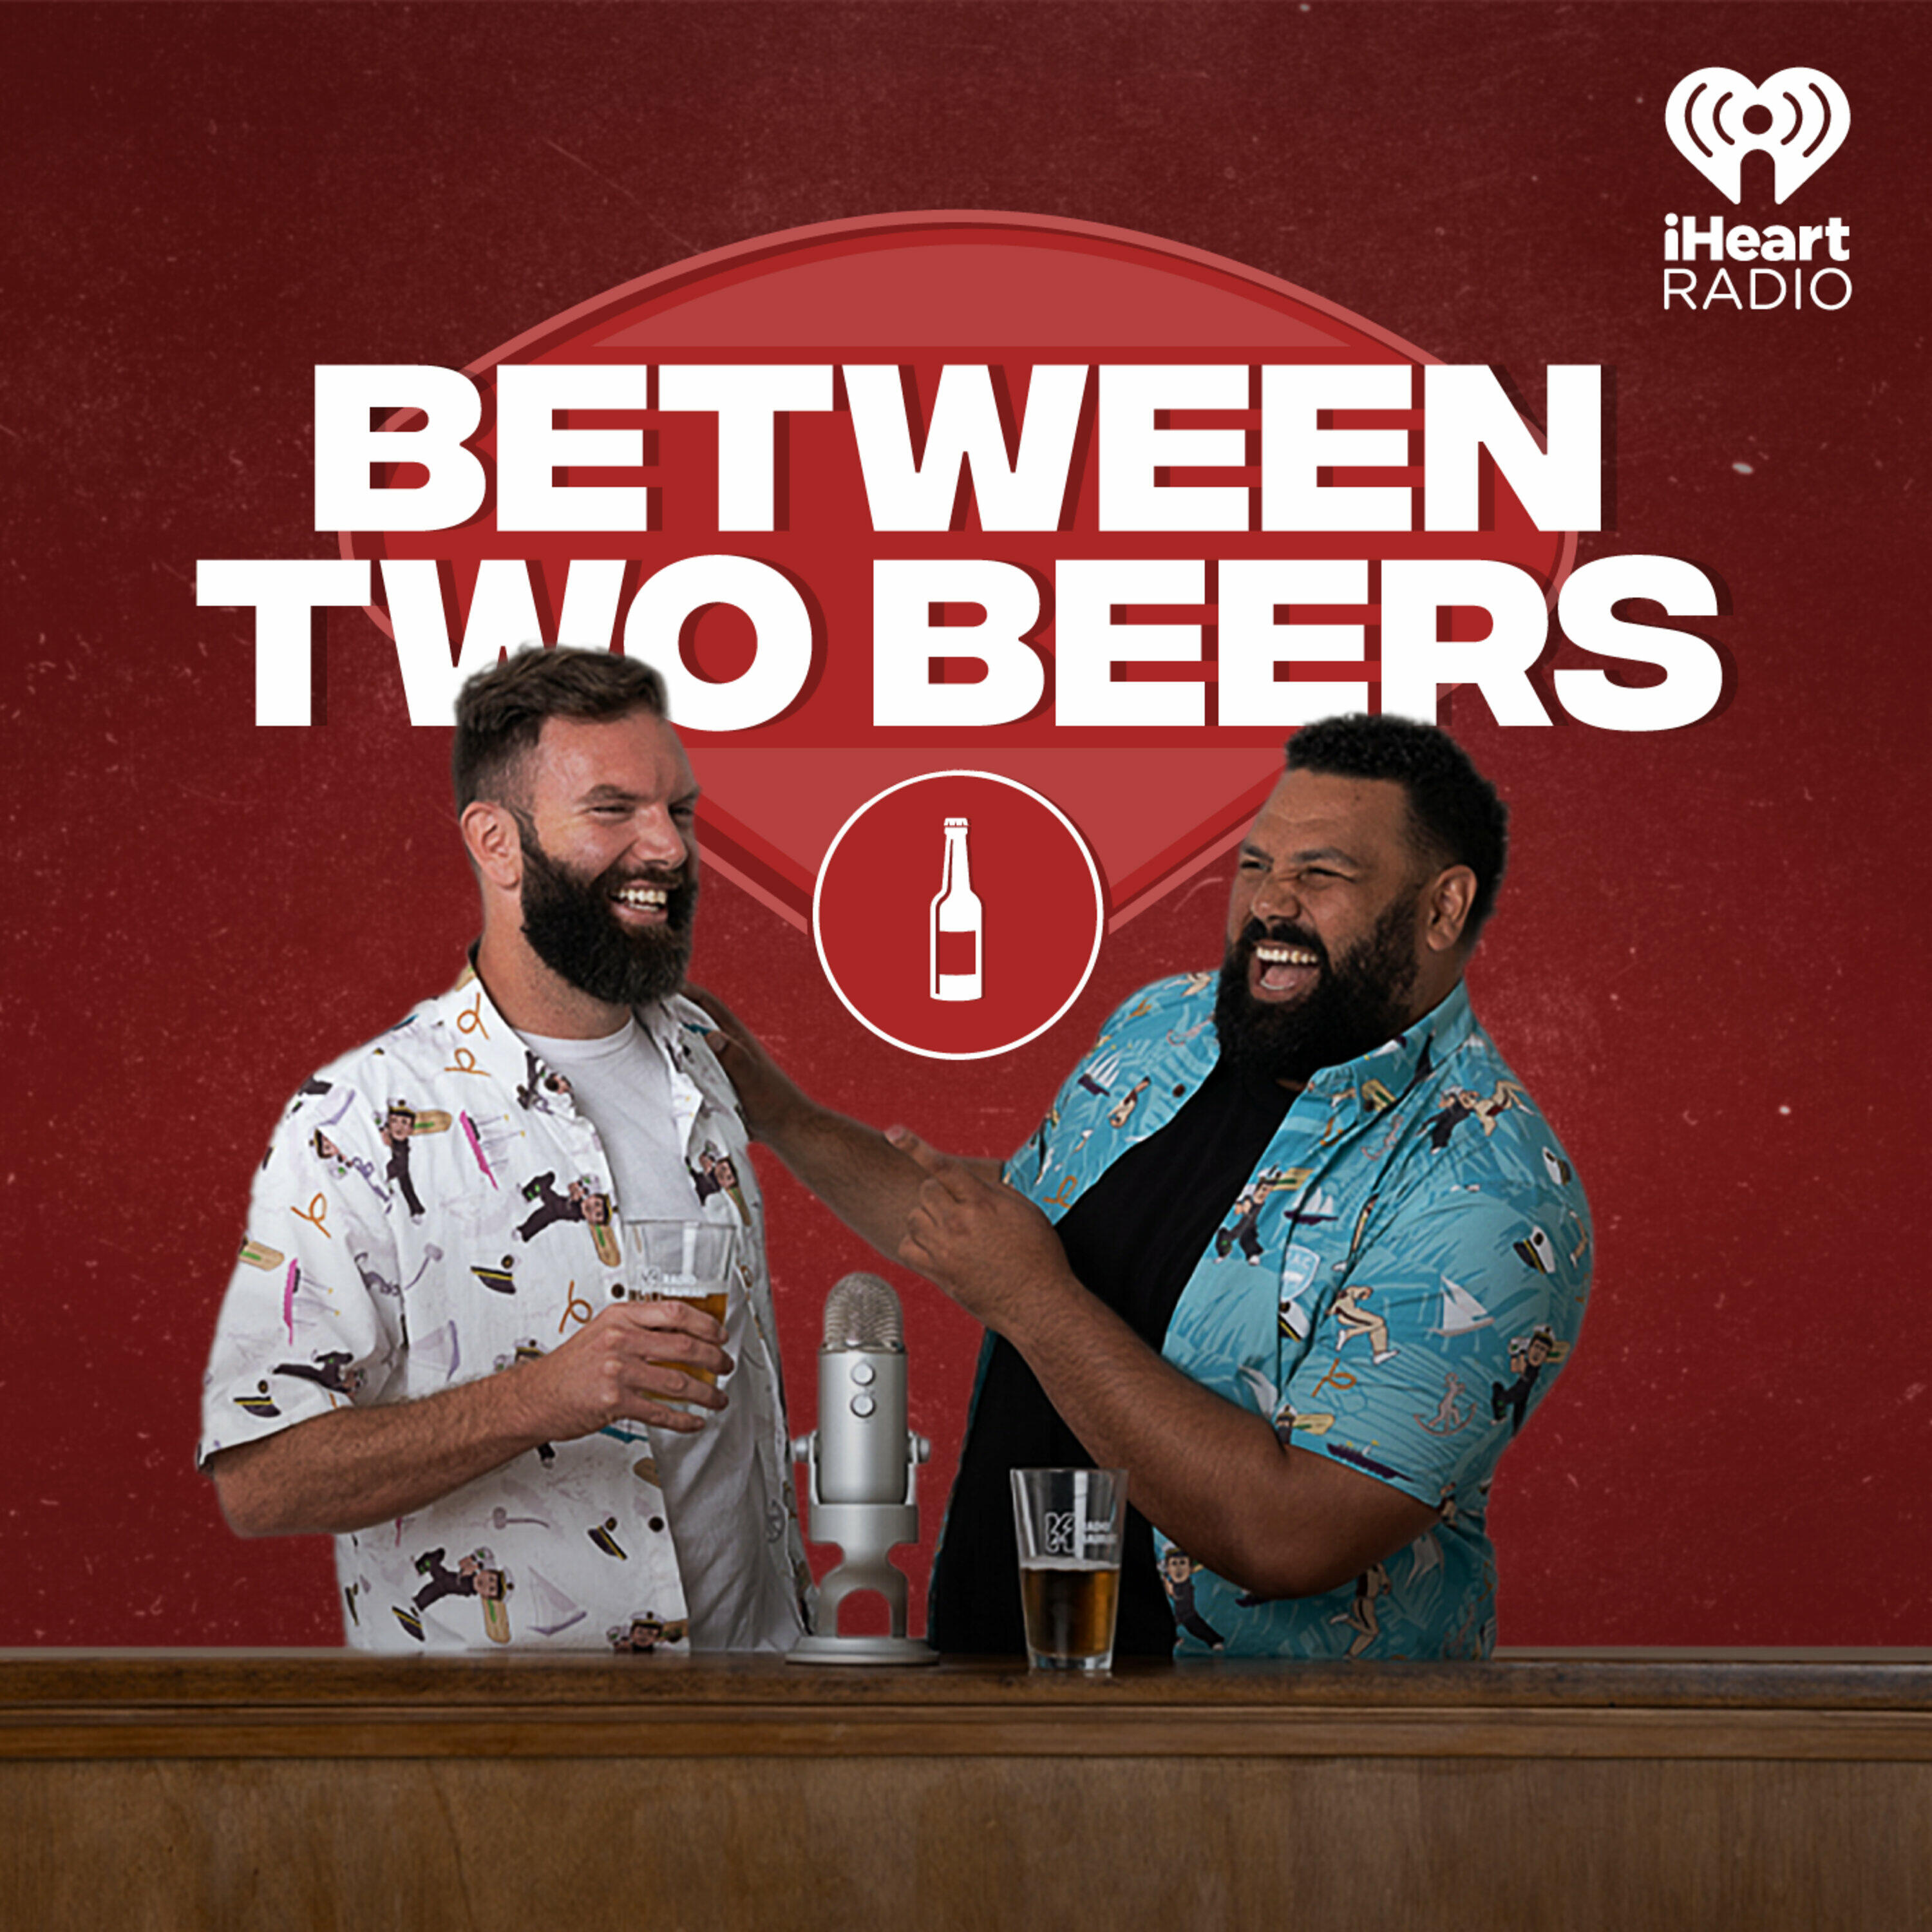 Between Two Beers Podcast iHeart